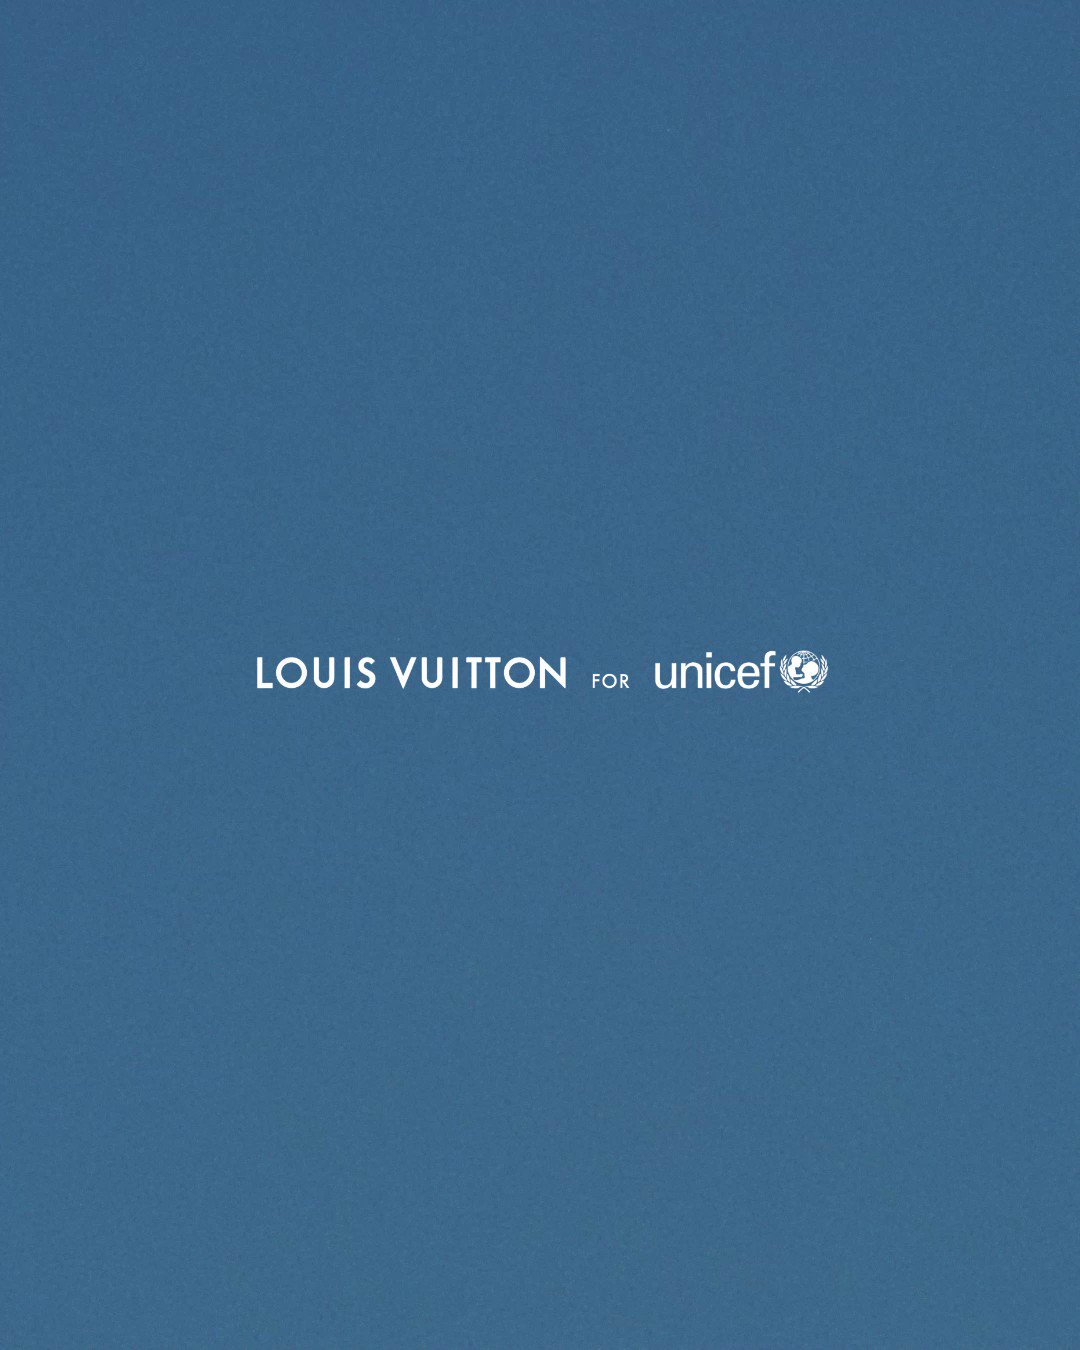 Louis Vuitton - #MAKEAPROMISE with UNICEF and Louis